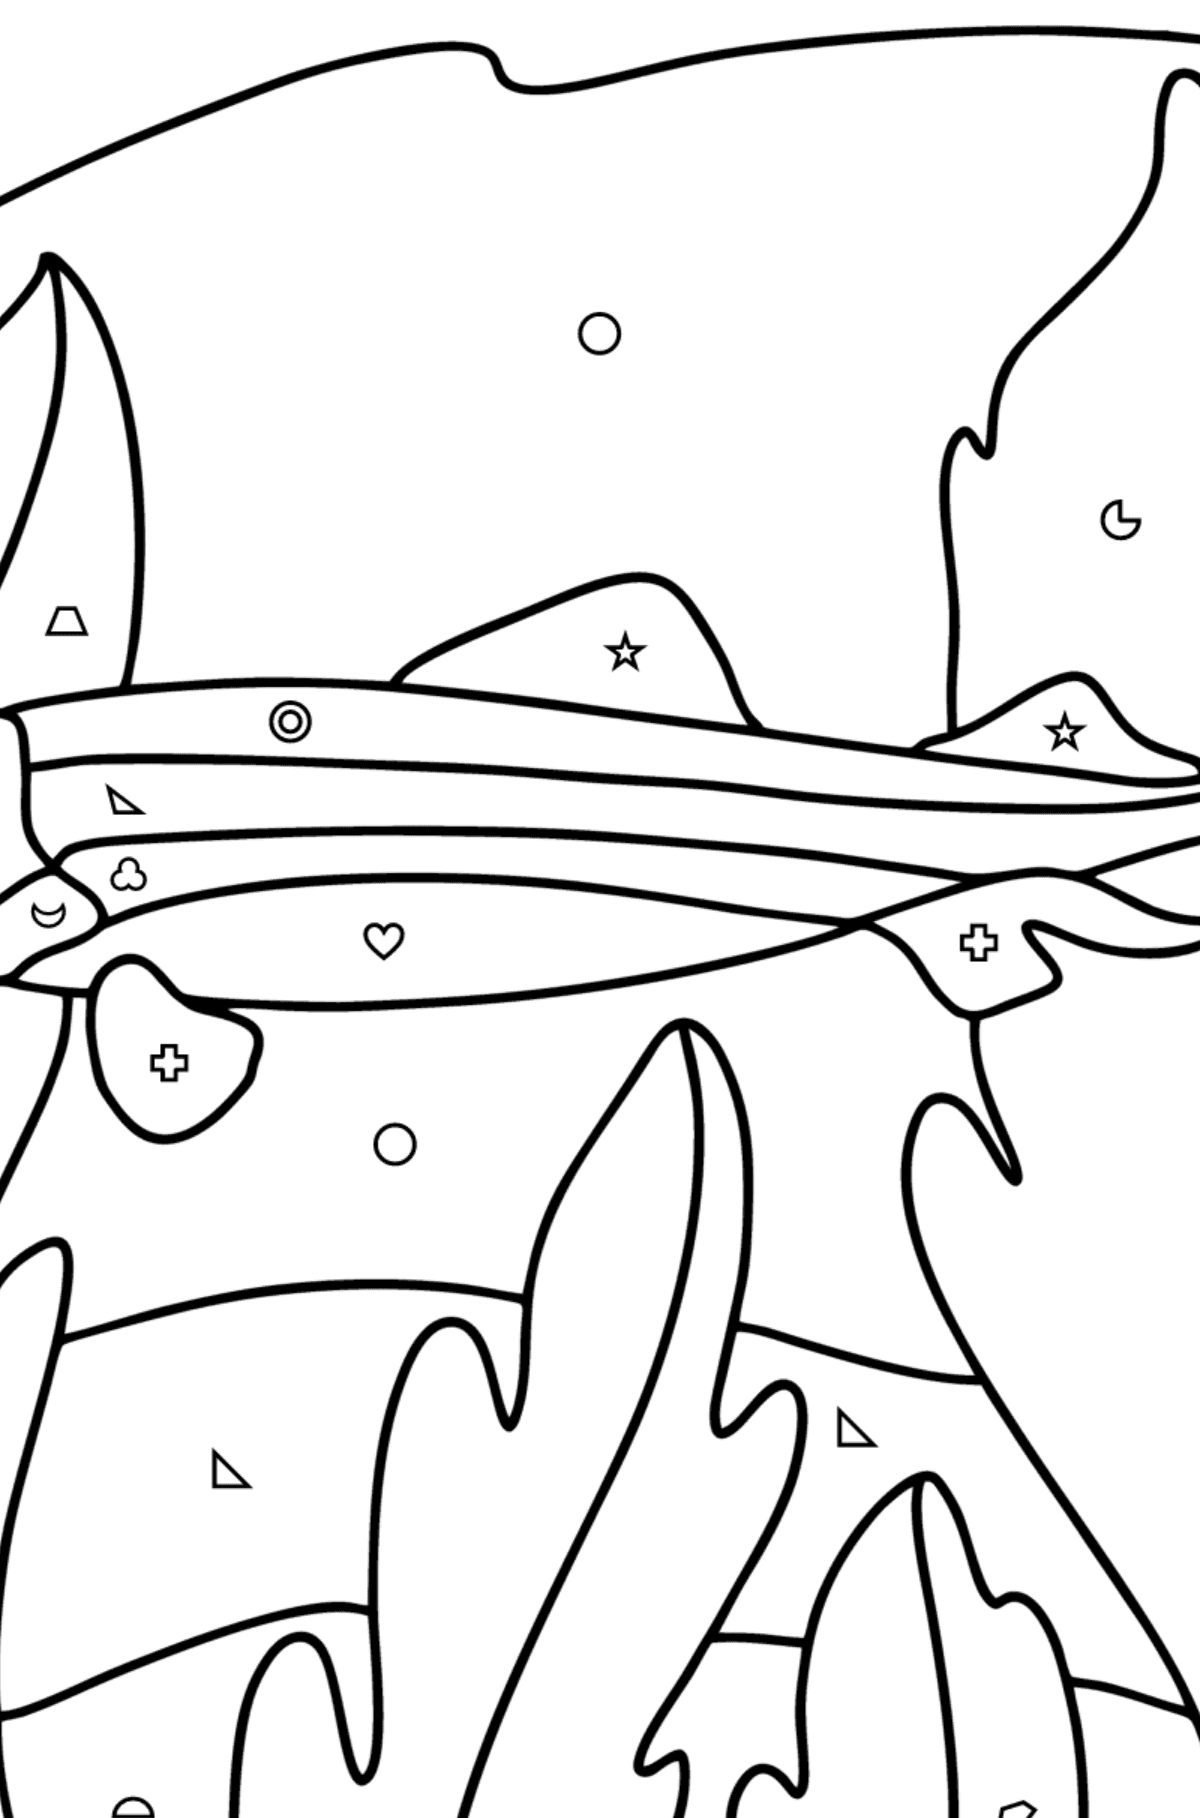 Crocodile Shark coloring page - Coloring by Geometric Shapes for Kids